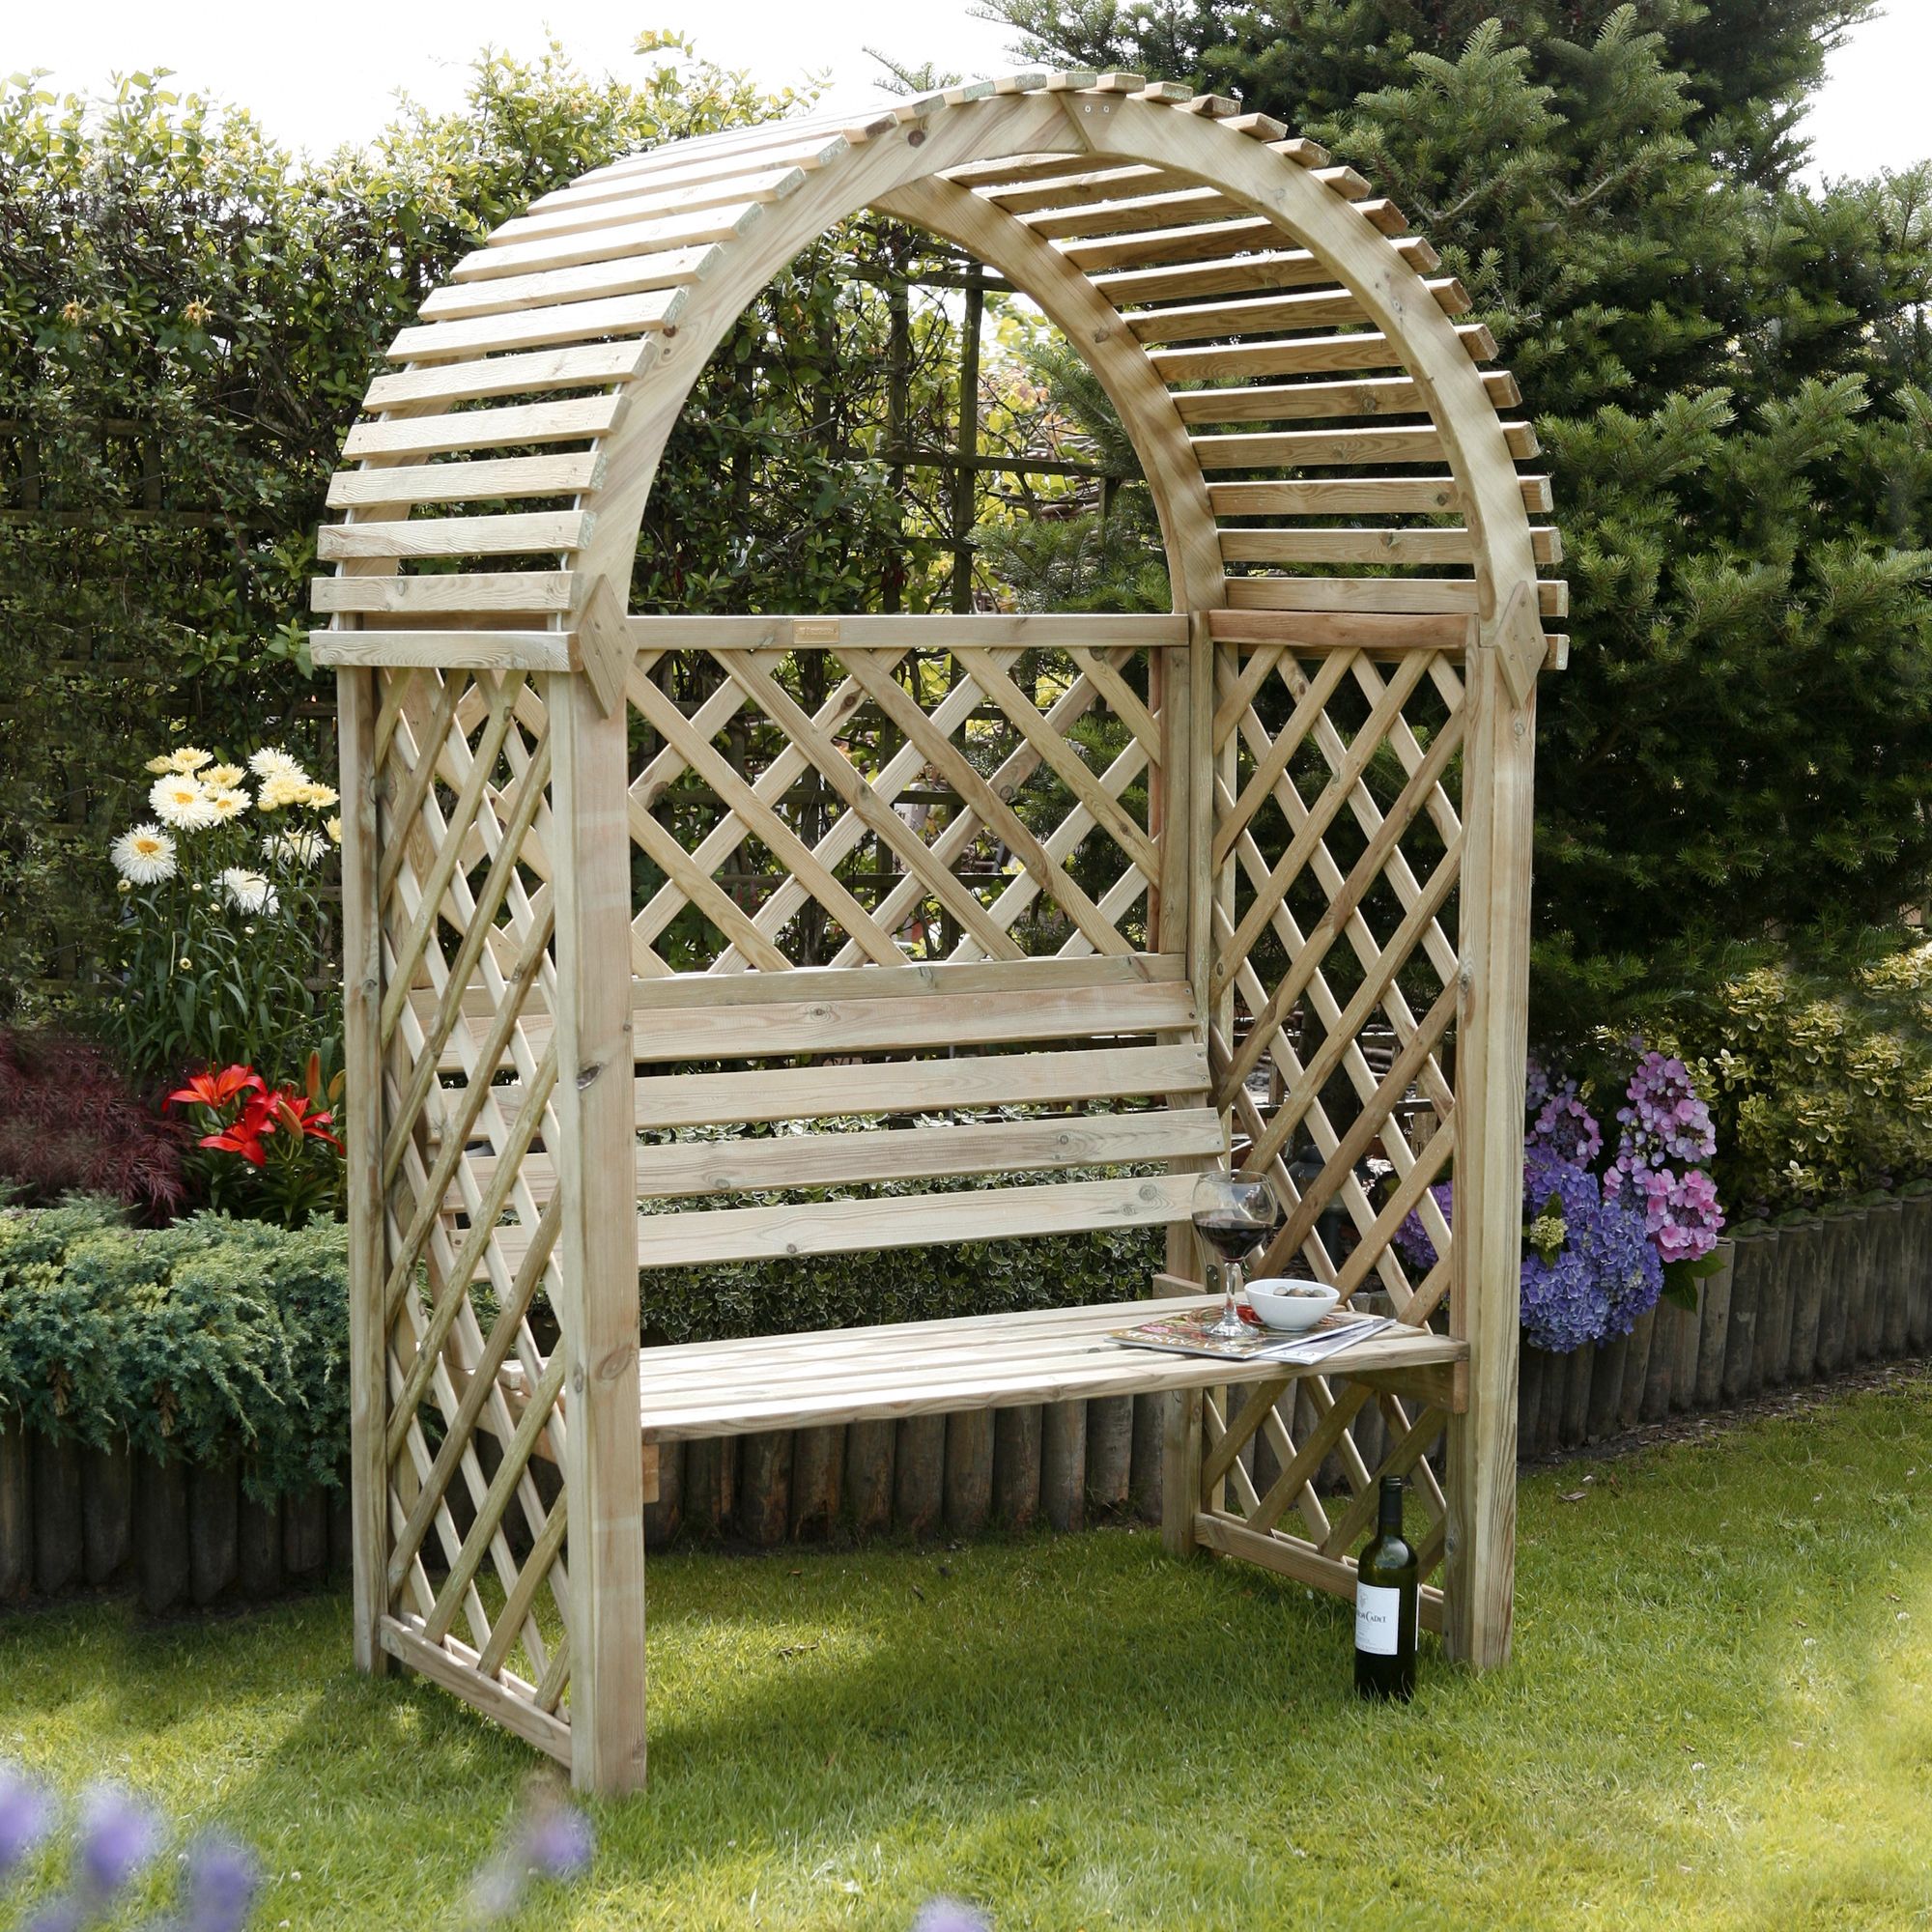 Blooma Chiltern Arbour | Departments | DIY at B&Q